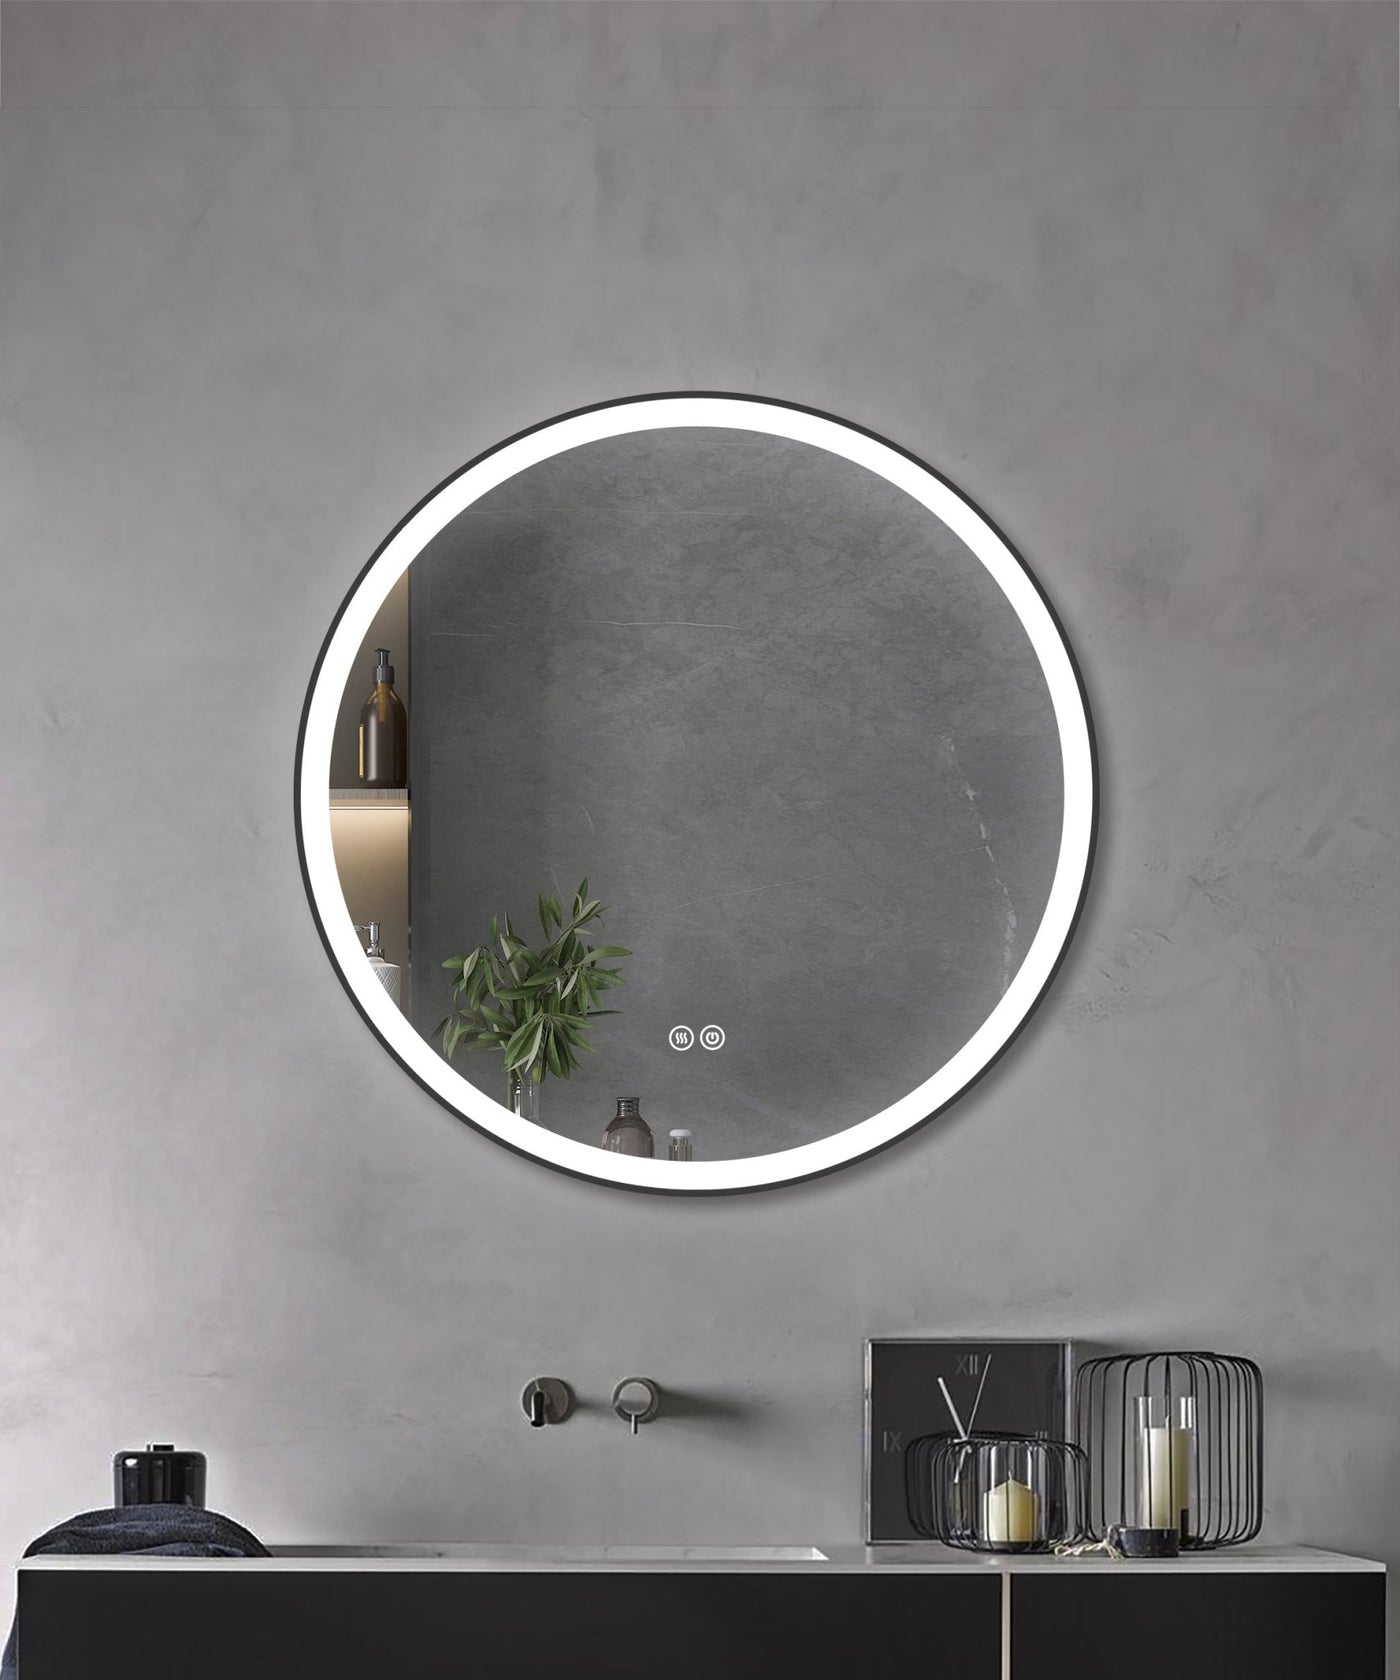 Black Framed Round LED Mirror with a Demister, Three Colour Selections, And A Convenient Dimmer